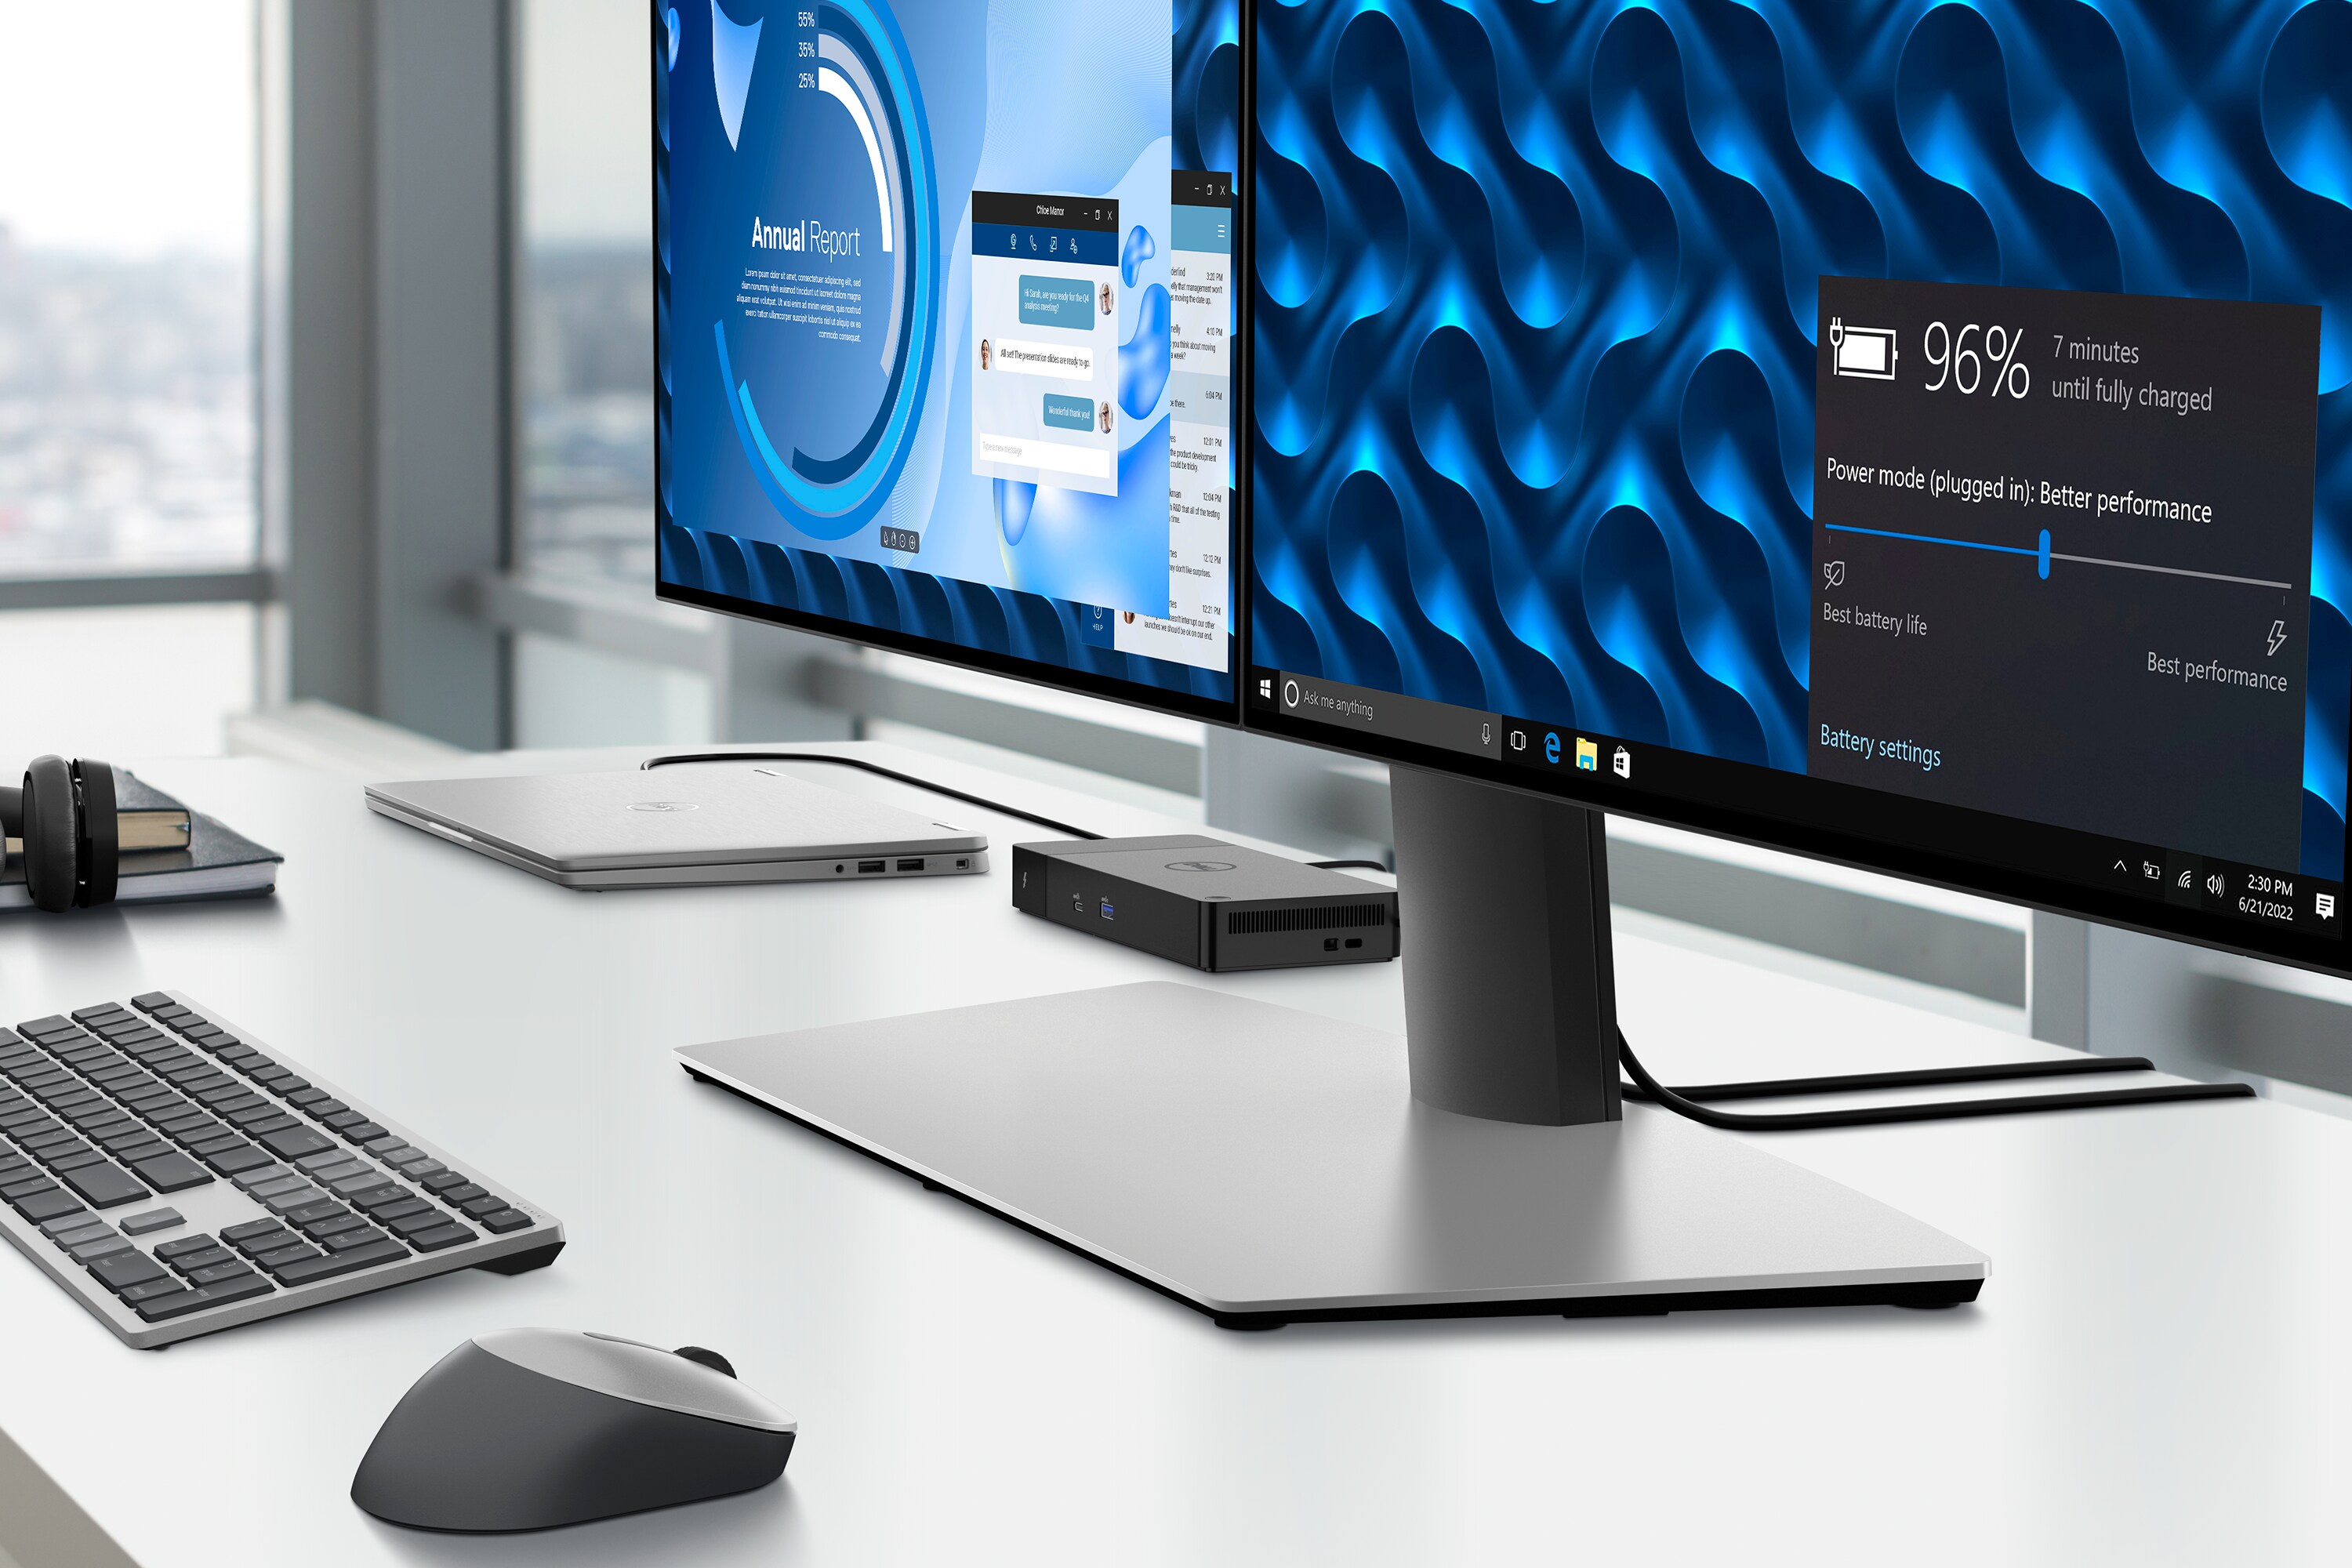 Dell Thunderbolt Dock - WD22TB4 Docking Price in India - Buy Dell  Thunderbolt Dock - WD22TB4 Docking online at